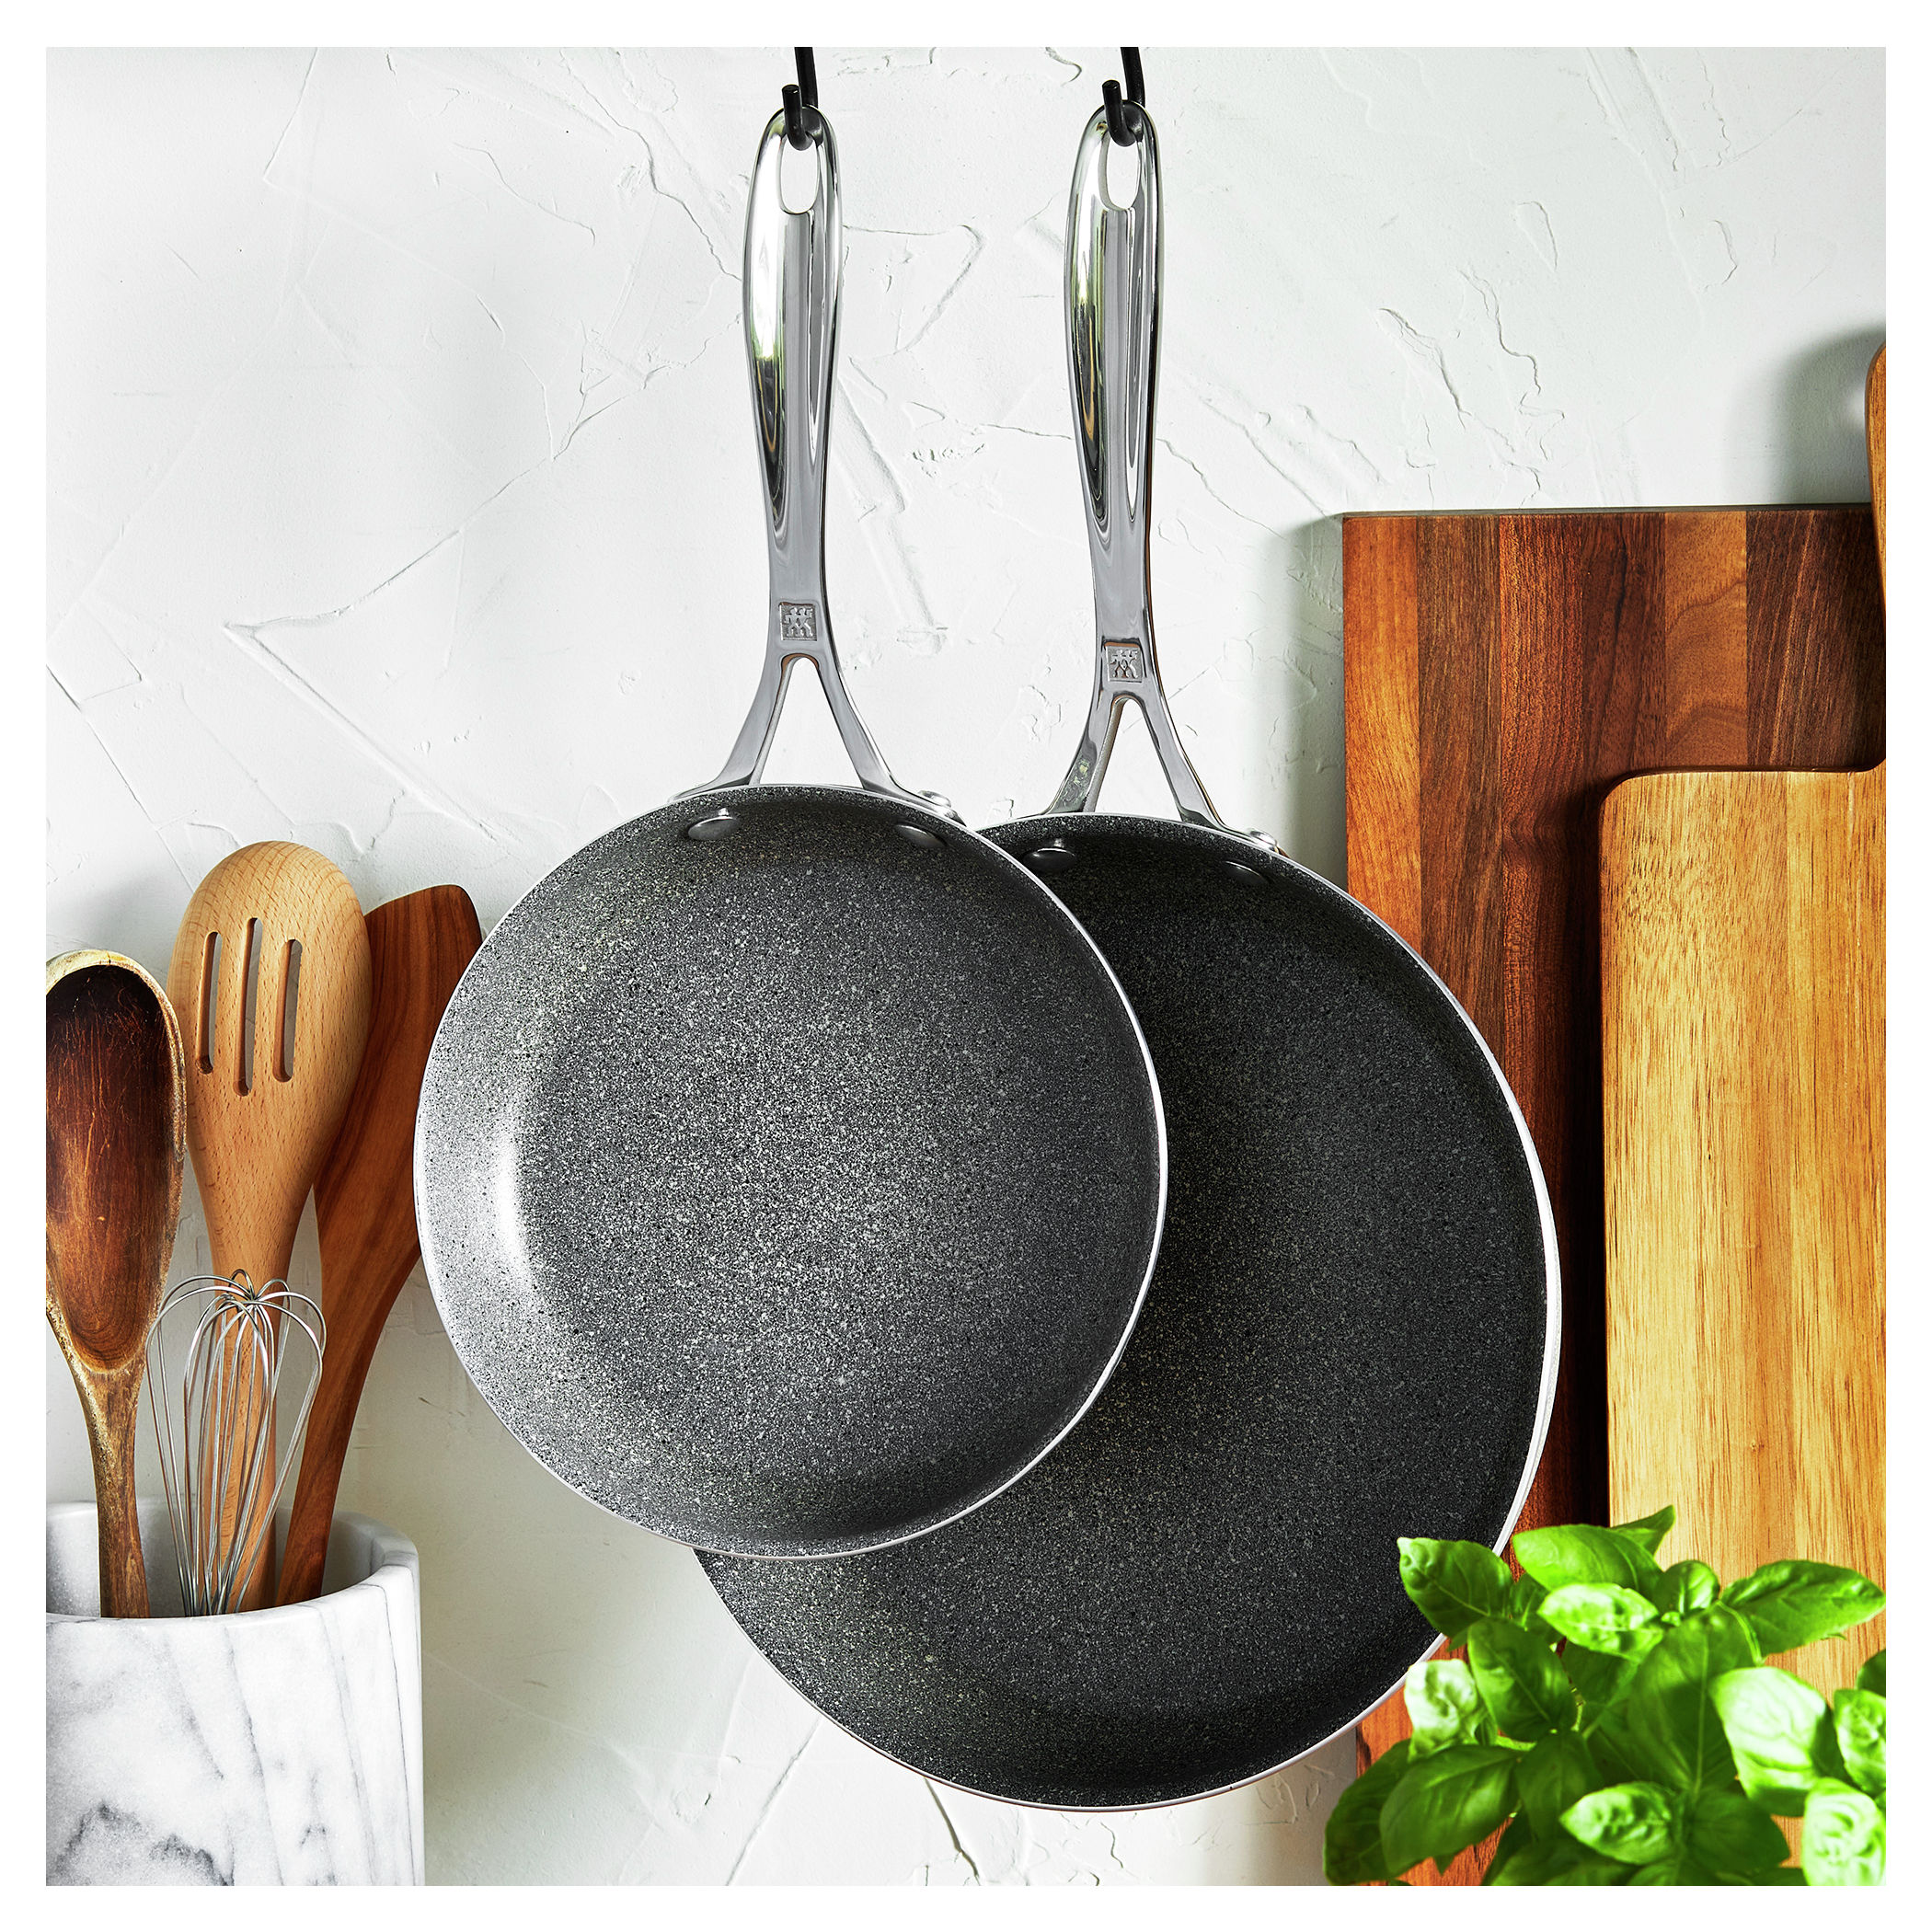 Buy ZWILLING Forte Pots and pans set